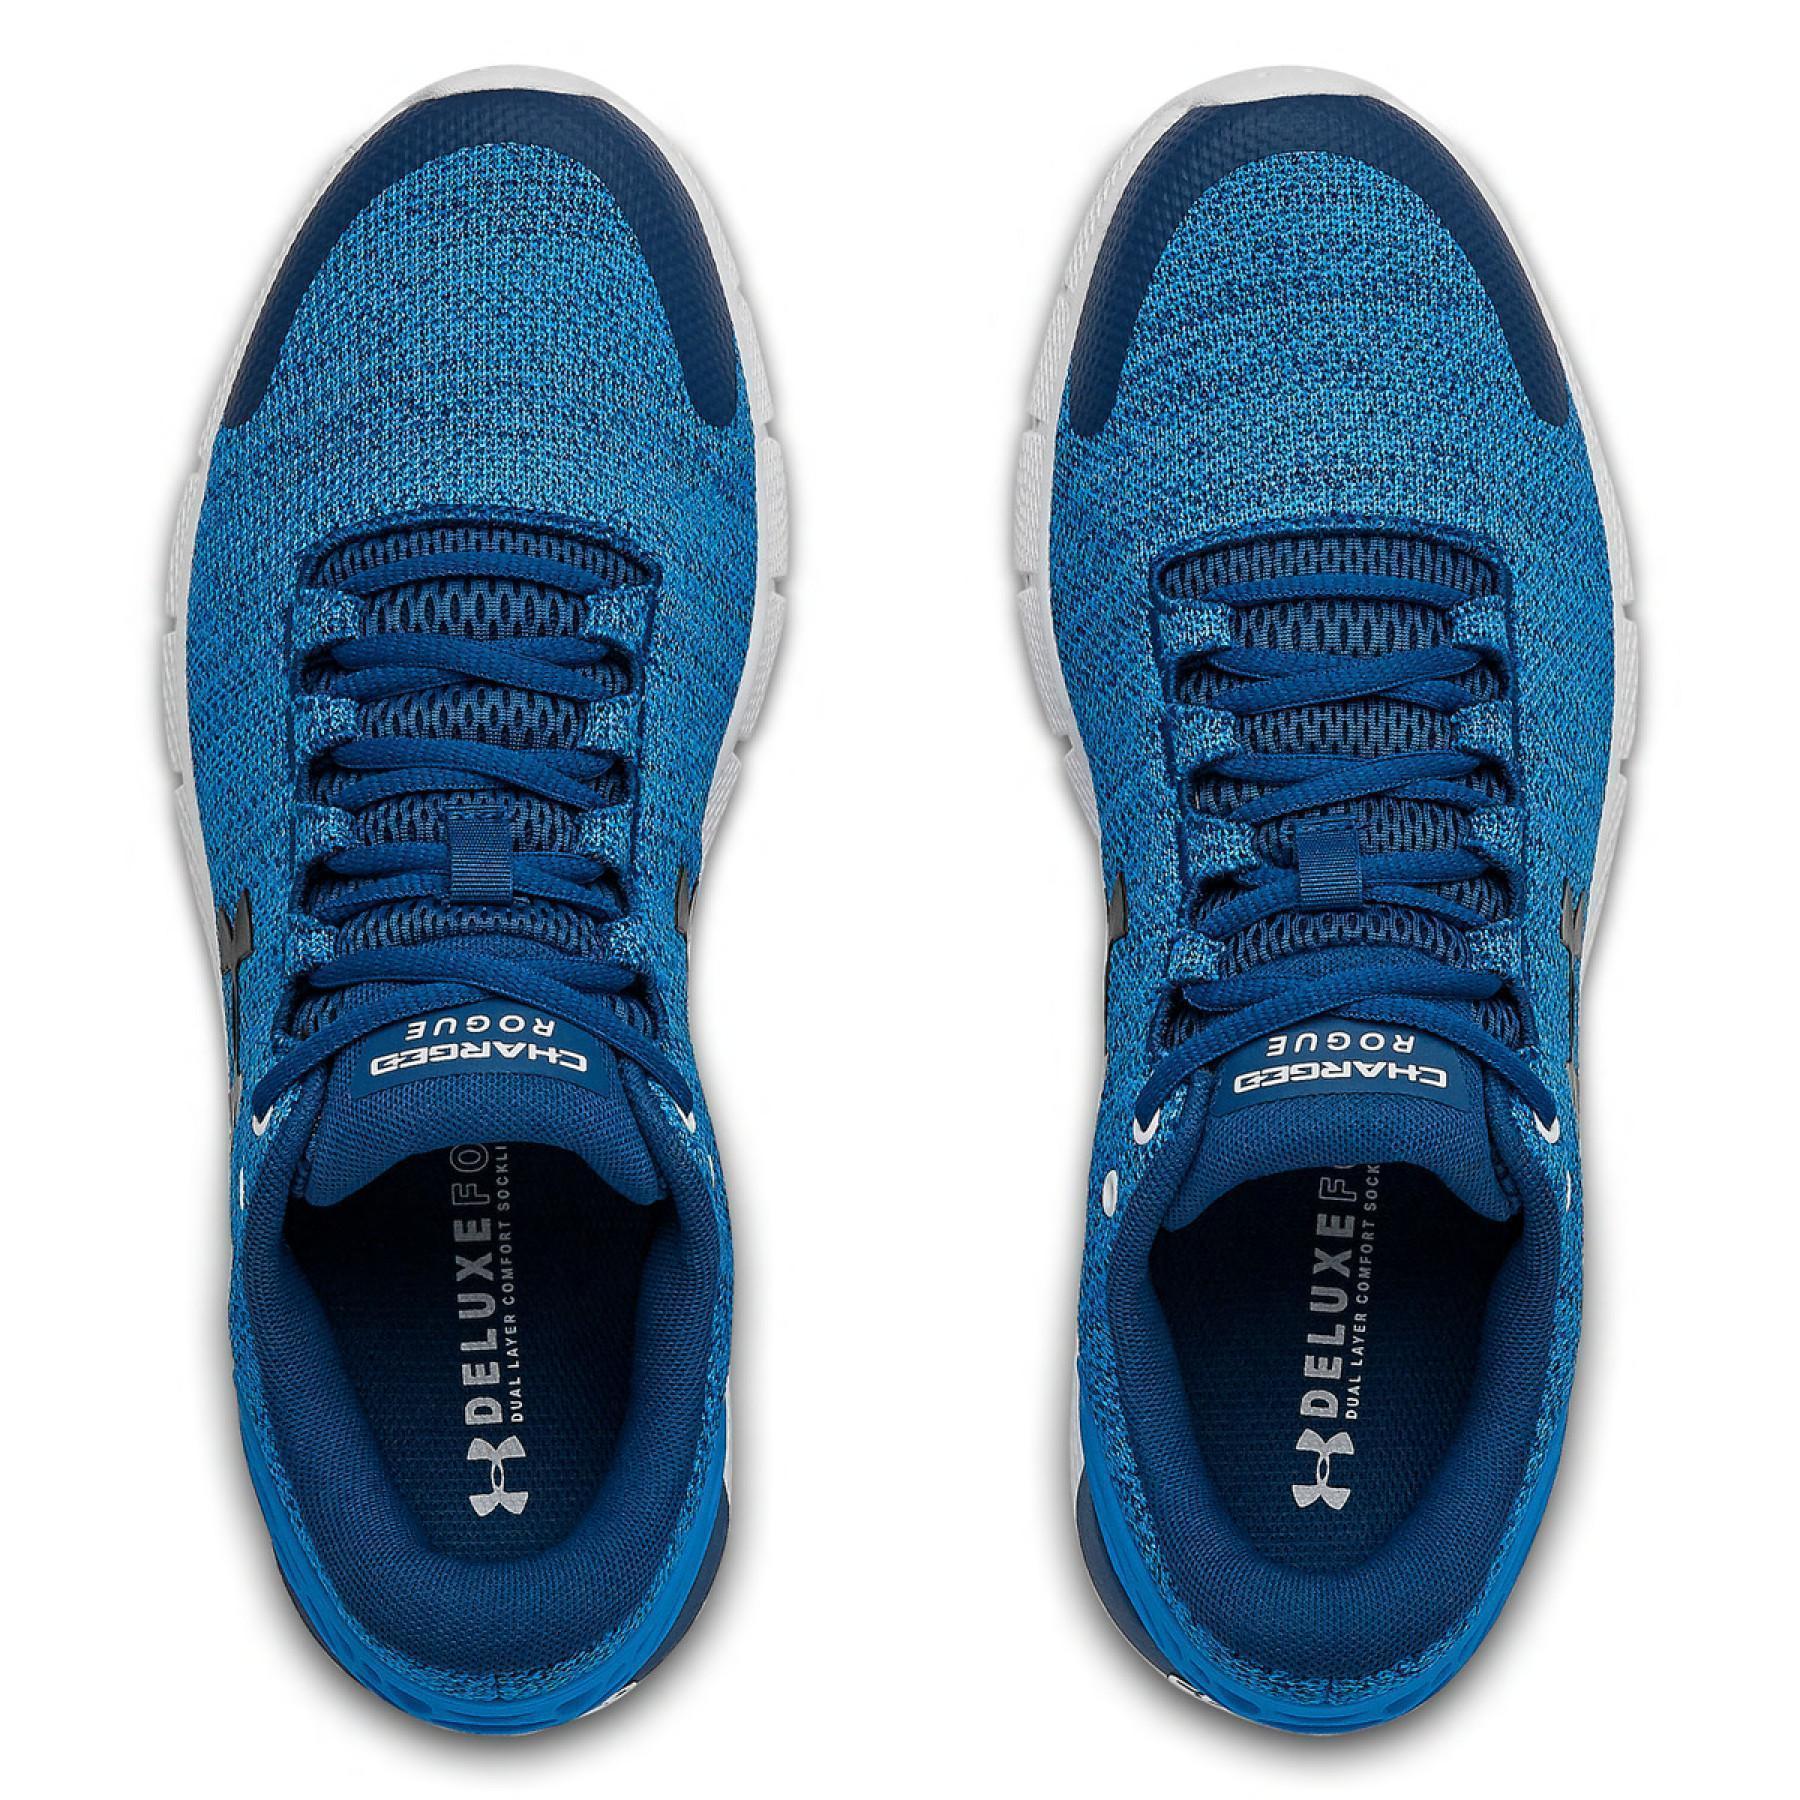 Zapatillas para correr Under Armour Charged Rogue 2 Twist